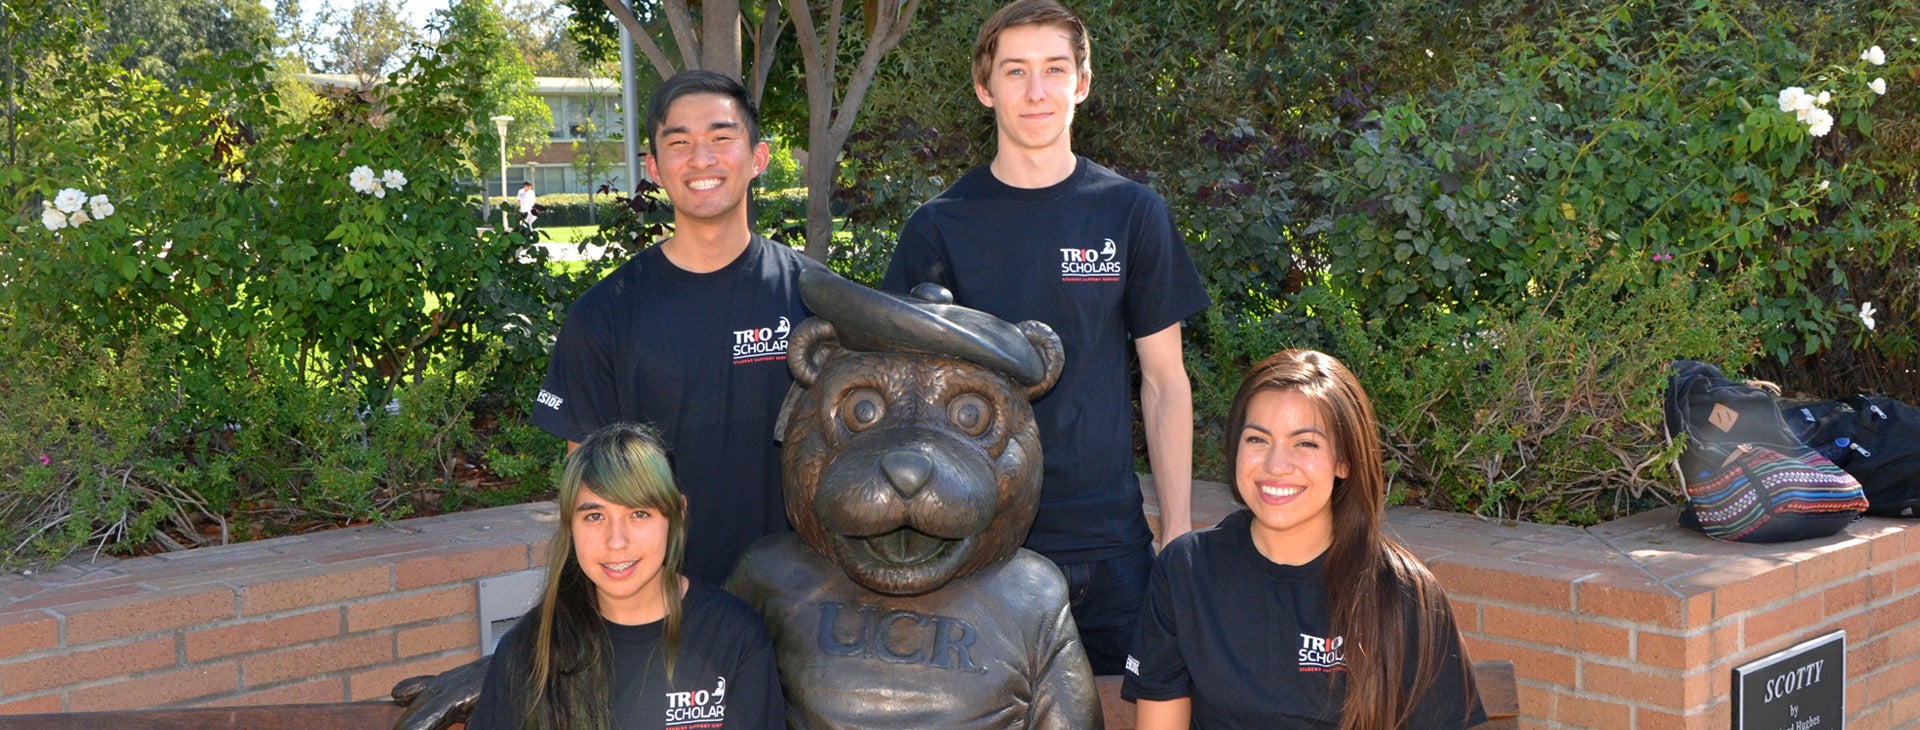 Four TRIO Scholars students pose near a sculpture of UCR's mascot, Scotty.